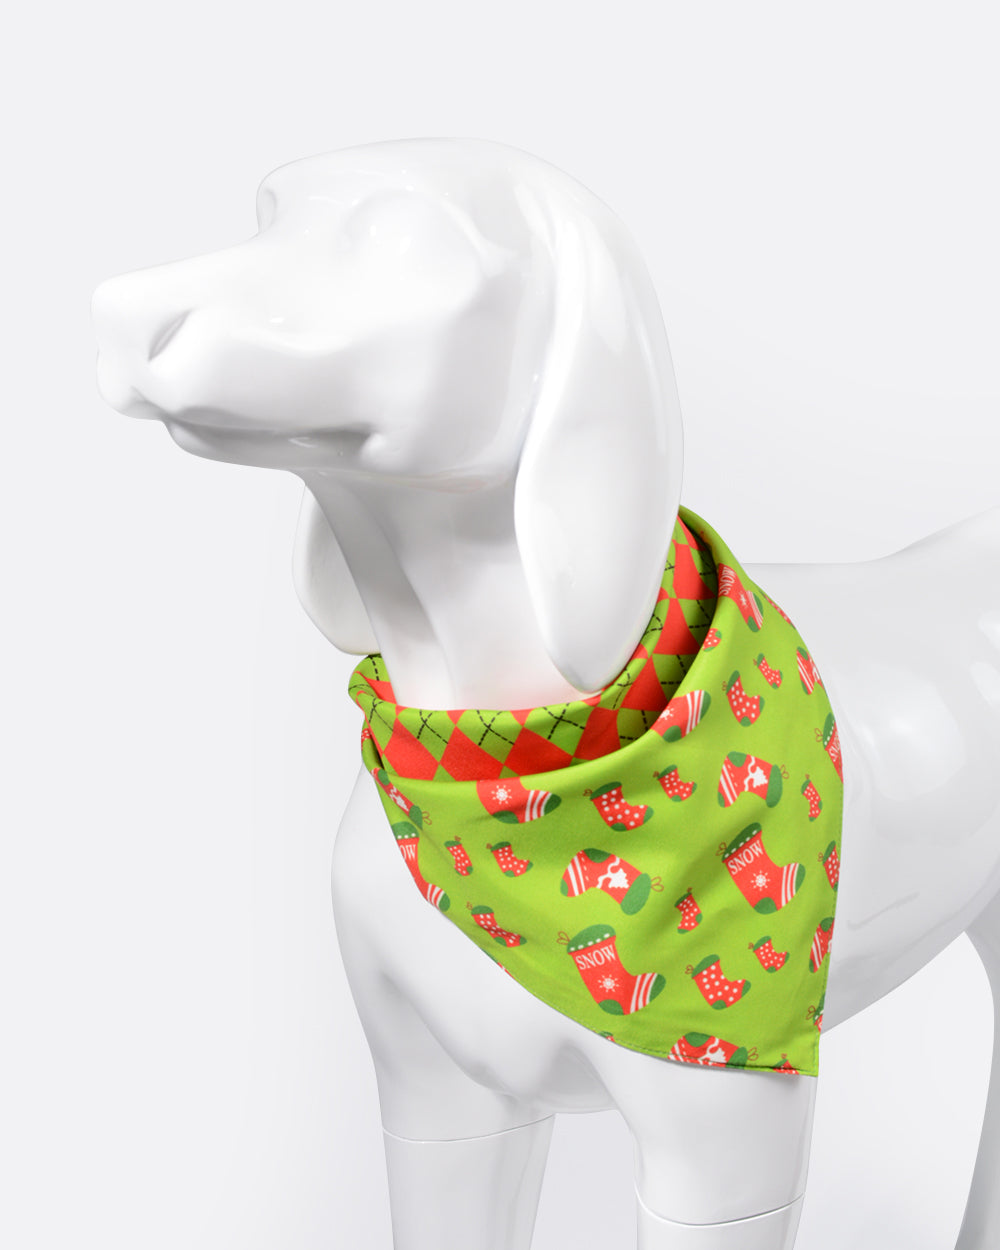 This Bella & Pal reversible tie-on dog bandana suit for medium or large dogs, such as Border Collie, Beagle, American Bulldog and Doberman Pinscher. The cute and refine Christmas socks pattern can better make your dog enter into festival atmosphere. 